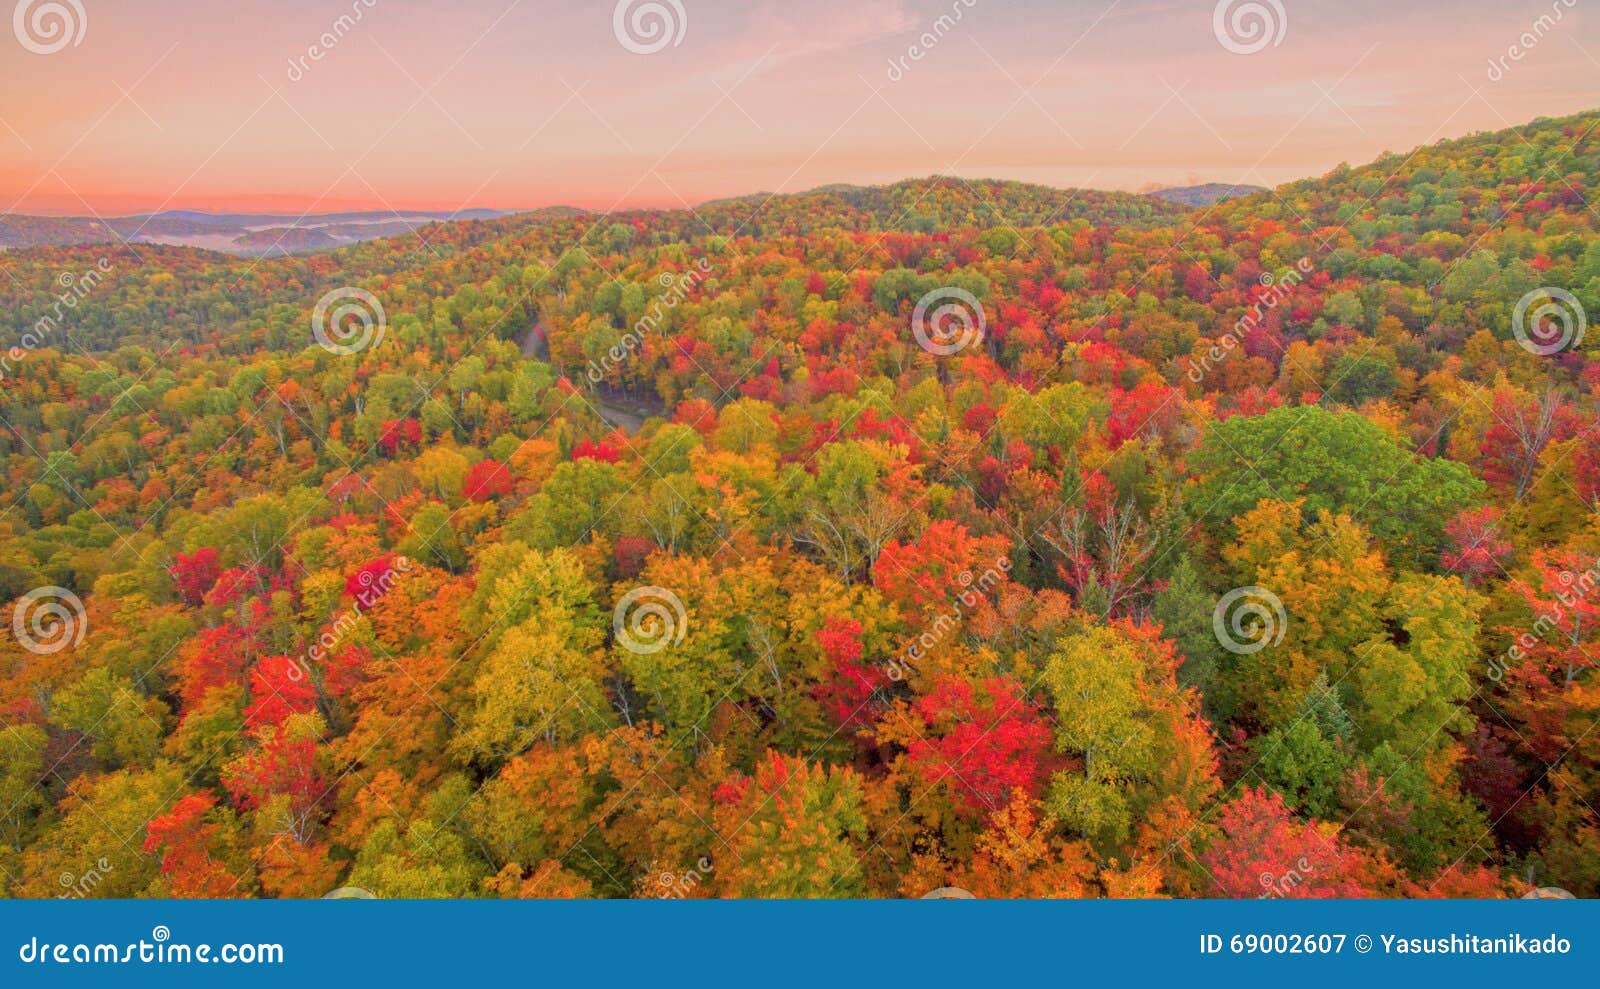 aerial fall color